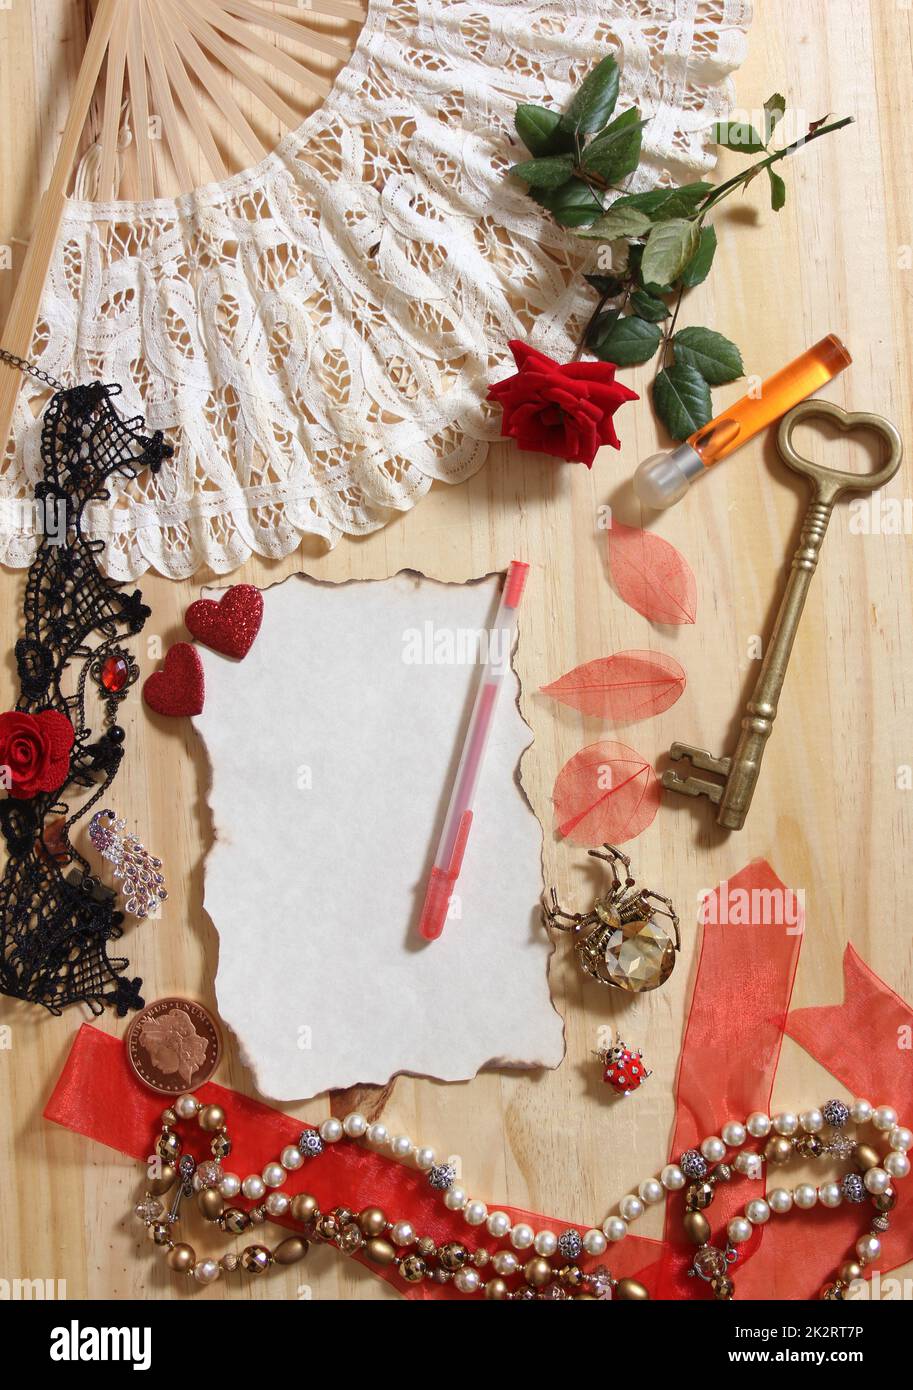 Vintage Jewelry and Lace With Antique Key on Wooden Background Stock Photo